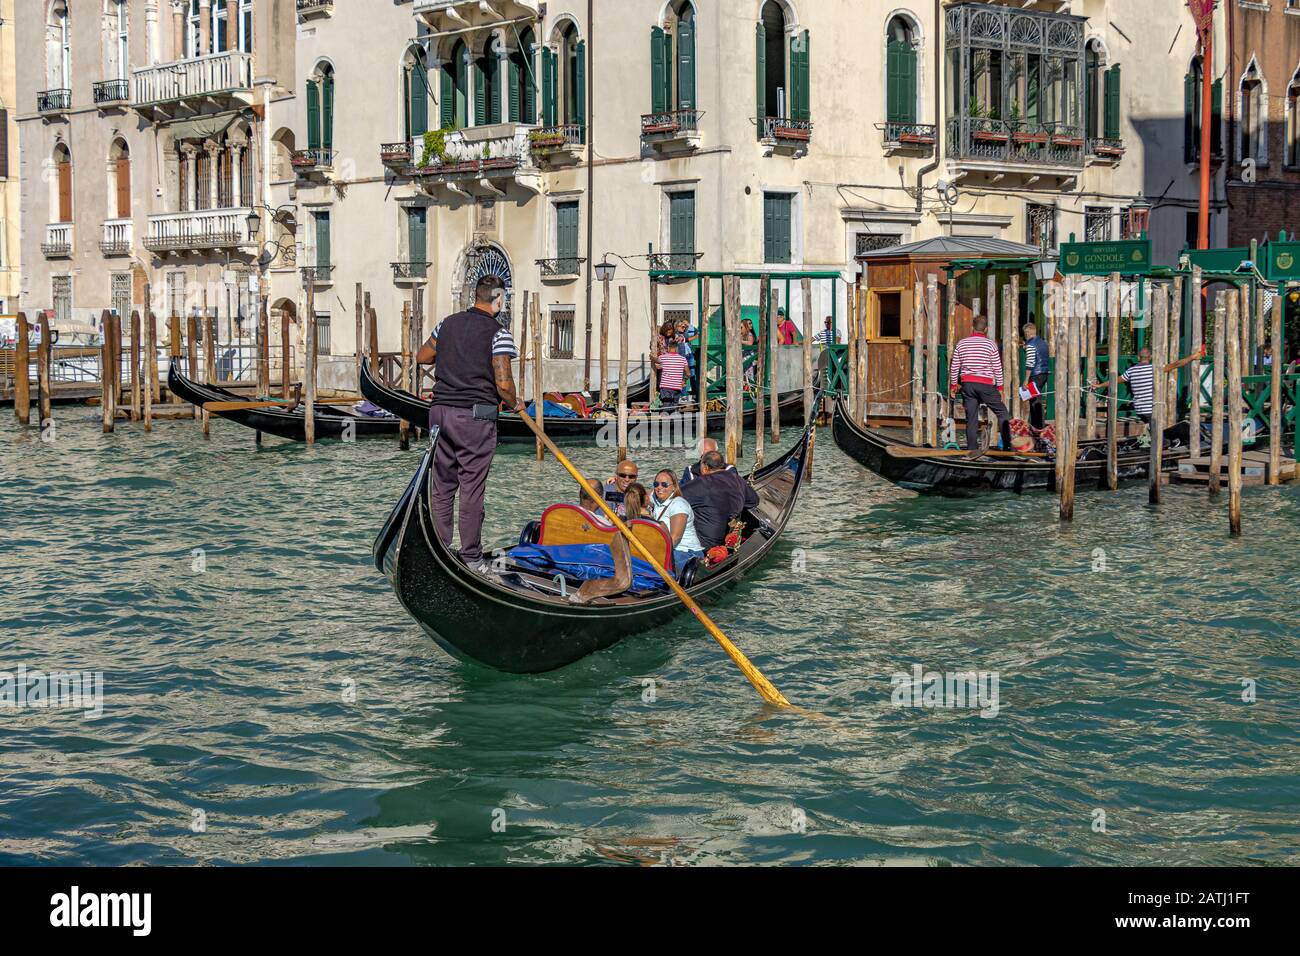 Torists taking a gondola ride on The Grand Canal ,Venice ,Italy Stock Photo